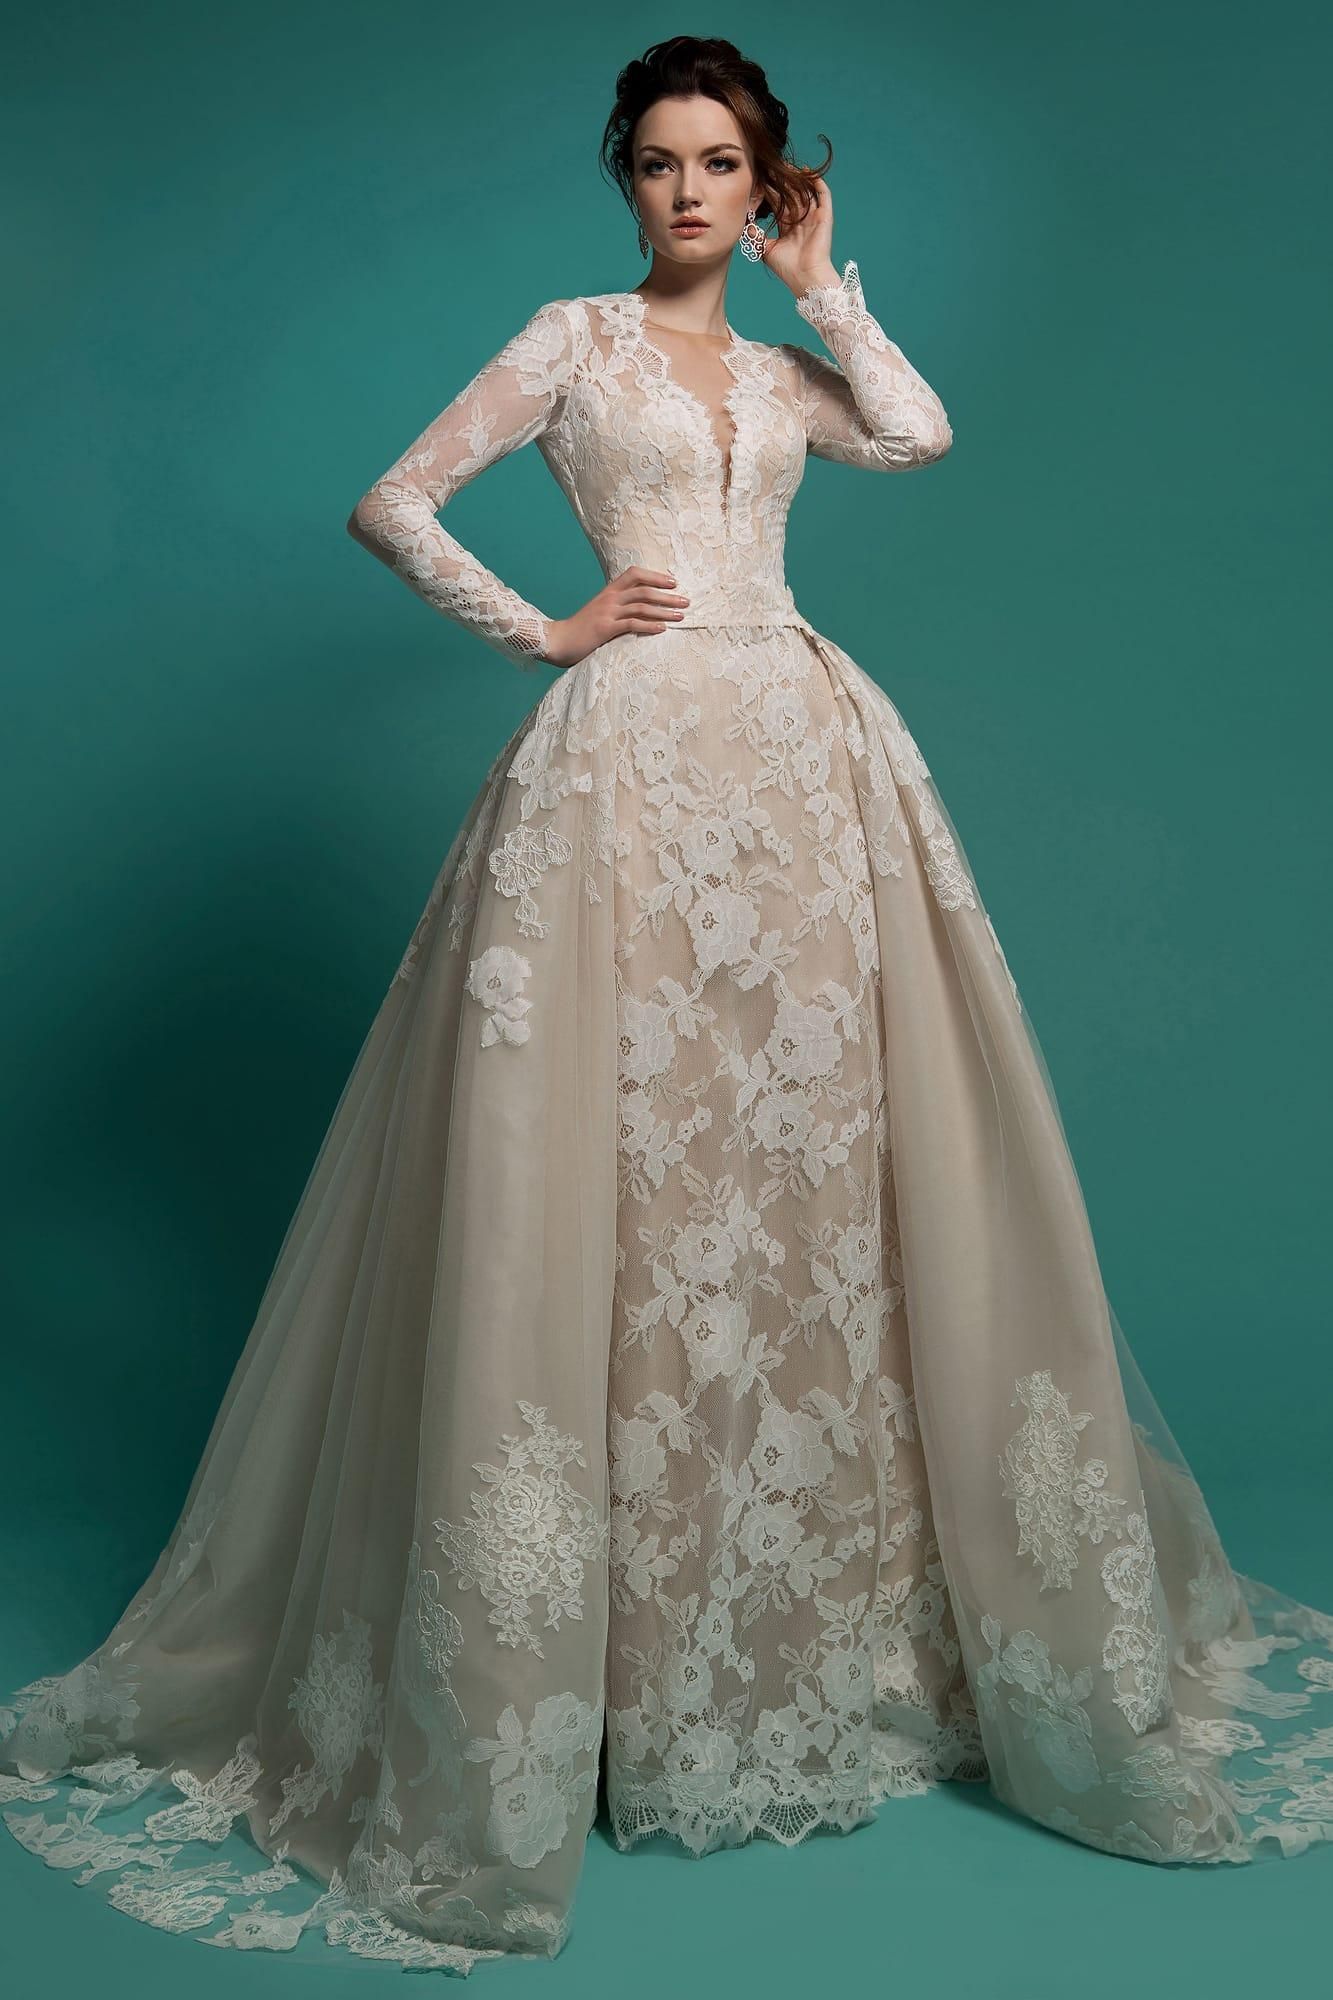 2020 Ball Gown Wedding Dress Long Sleeve Appliques Lace